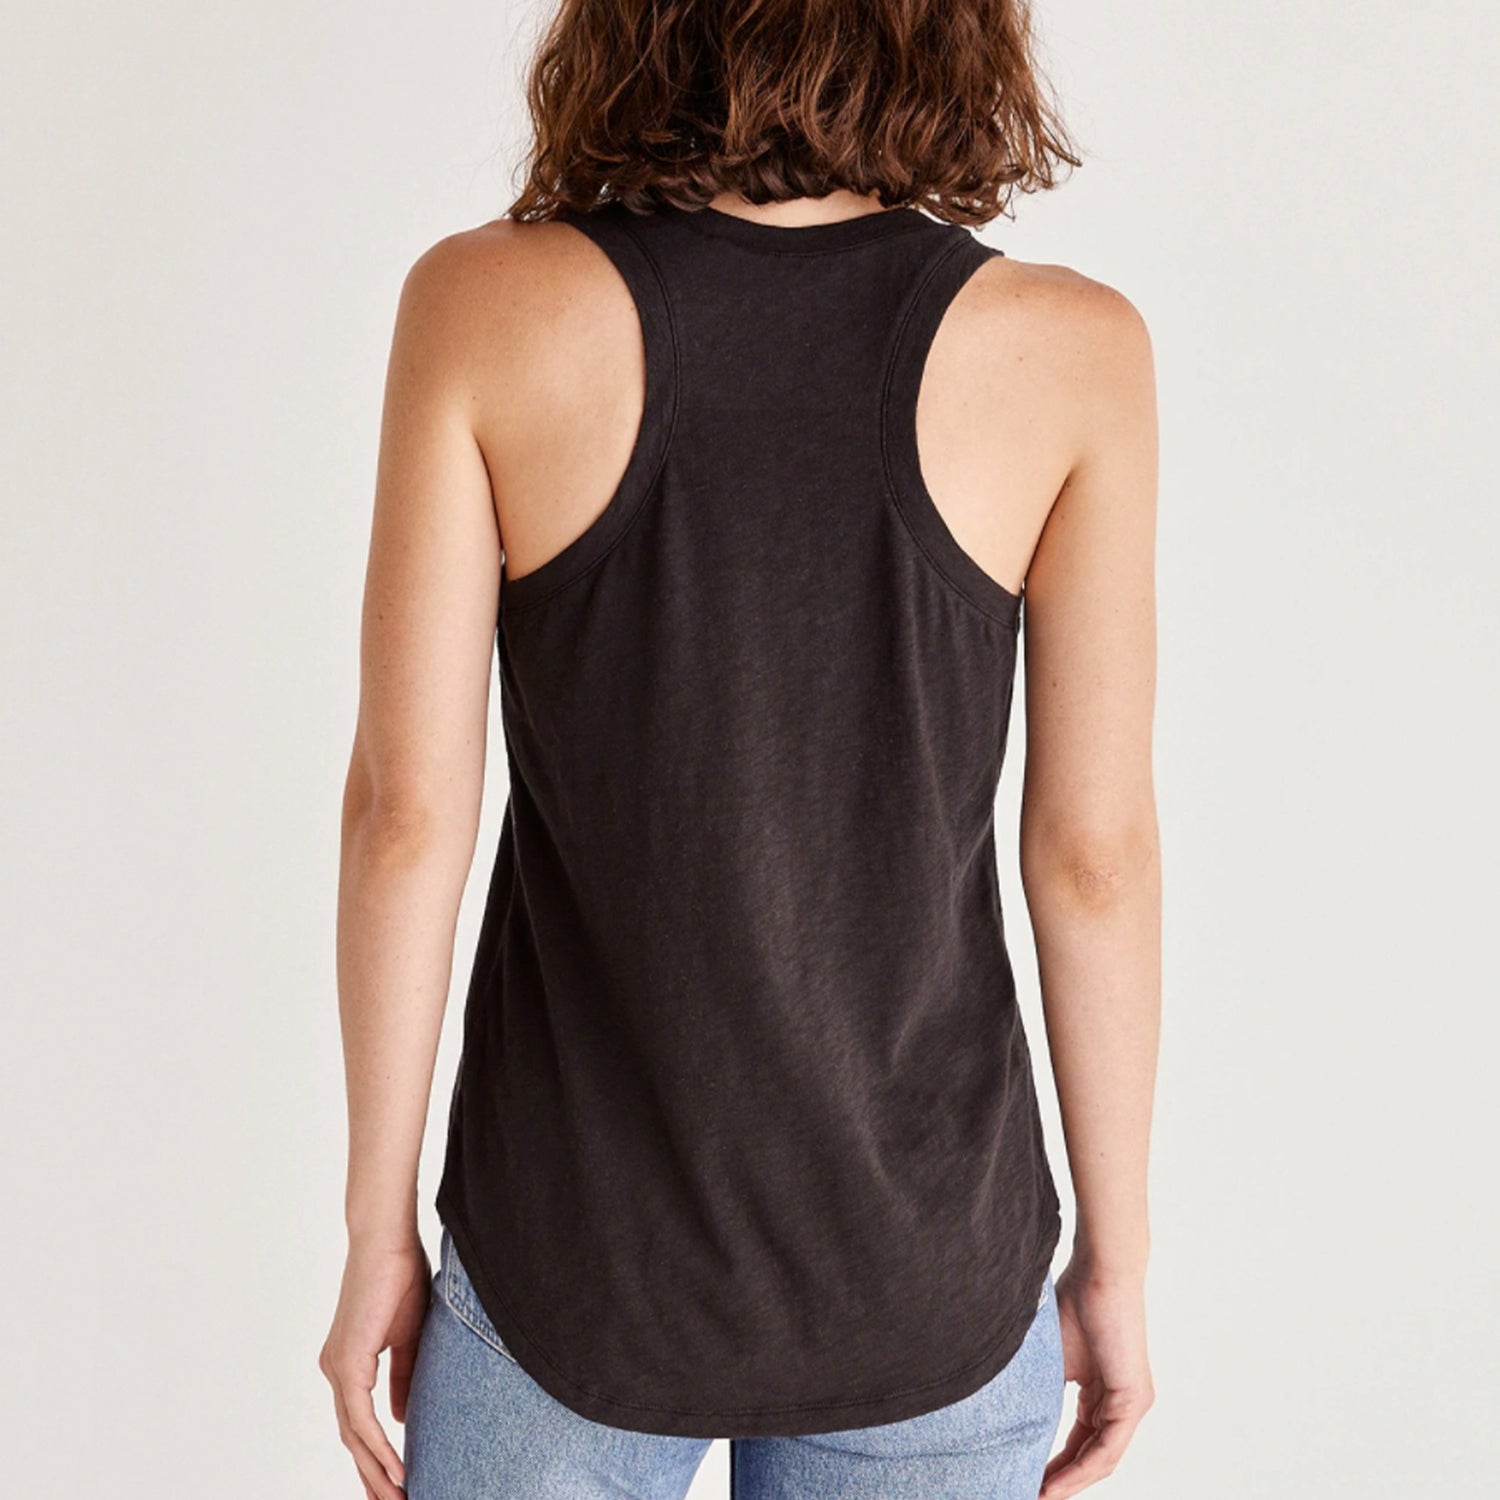 Z Supply Relaxed Slub Tank. Get the comfort you deserve in this tank. This basic tank top is all about mobility and versatility